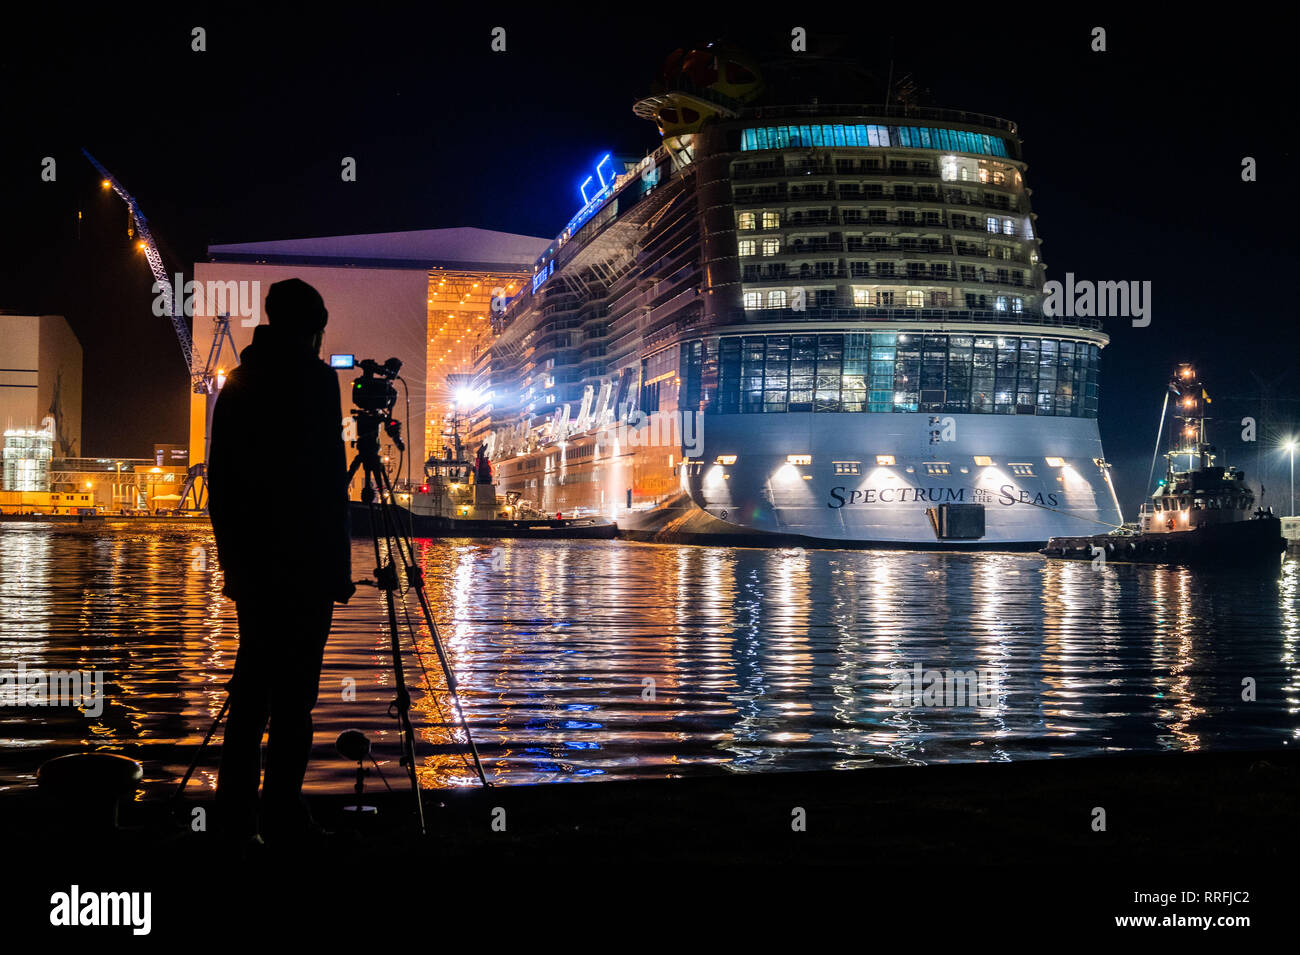 Mangel Supermarkt Opname Papenburg, Germany. 25th Feb, 2019. A man with a film camera on a tripod  stands in front of the harbour basin and watches as the cruise ship  "Spectrum of the Seas" leaves